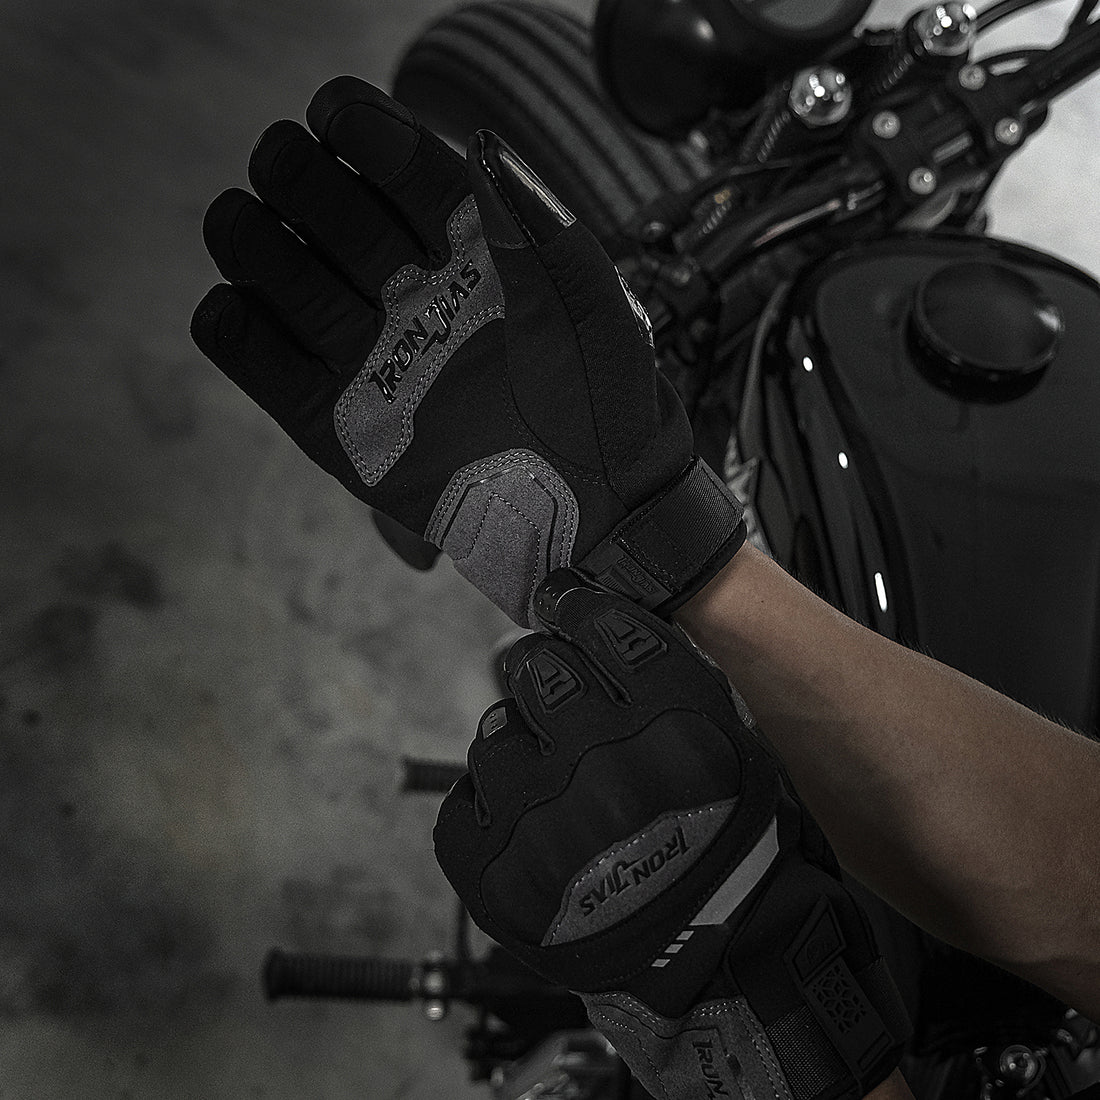 Best Heated Motorcycle Gloves: Electric Gloves For Cold Weather – IRONJIAS